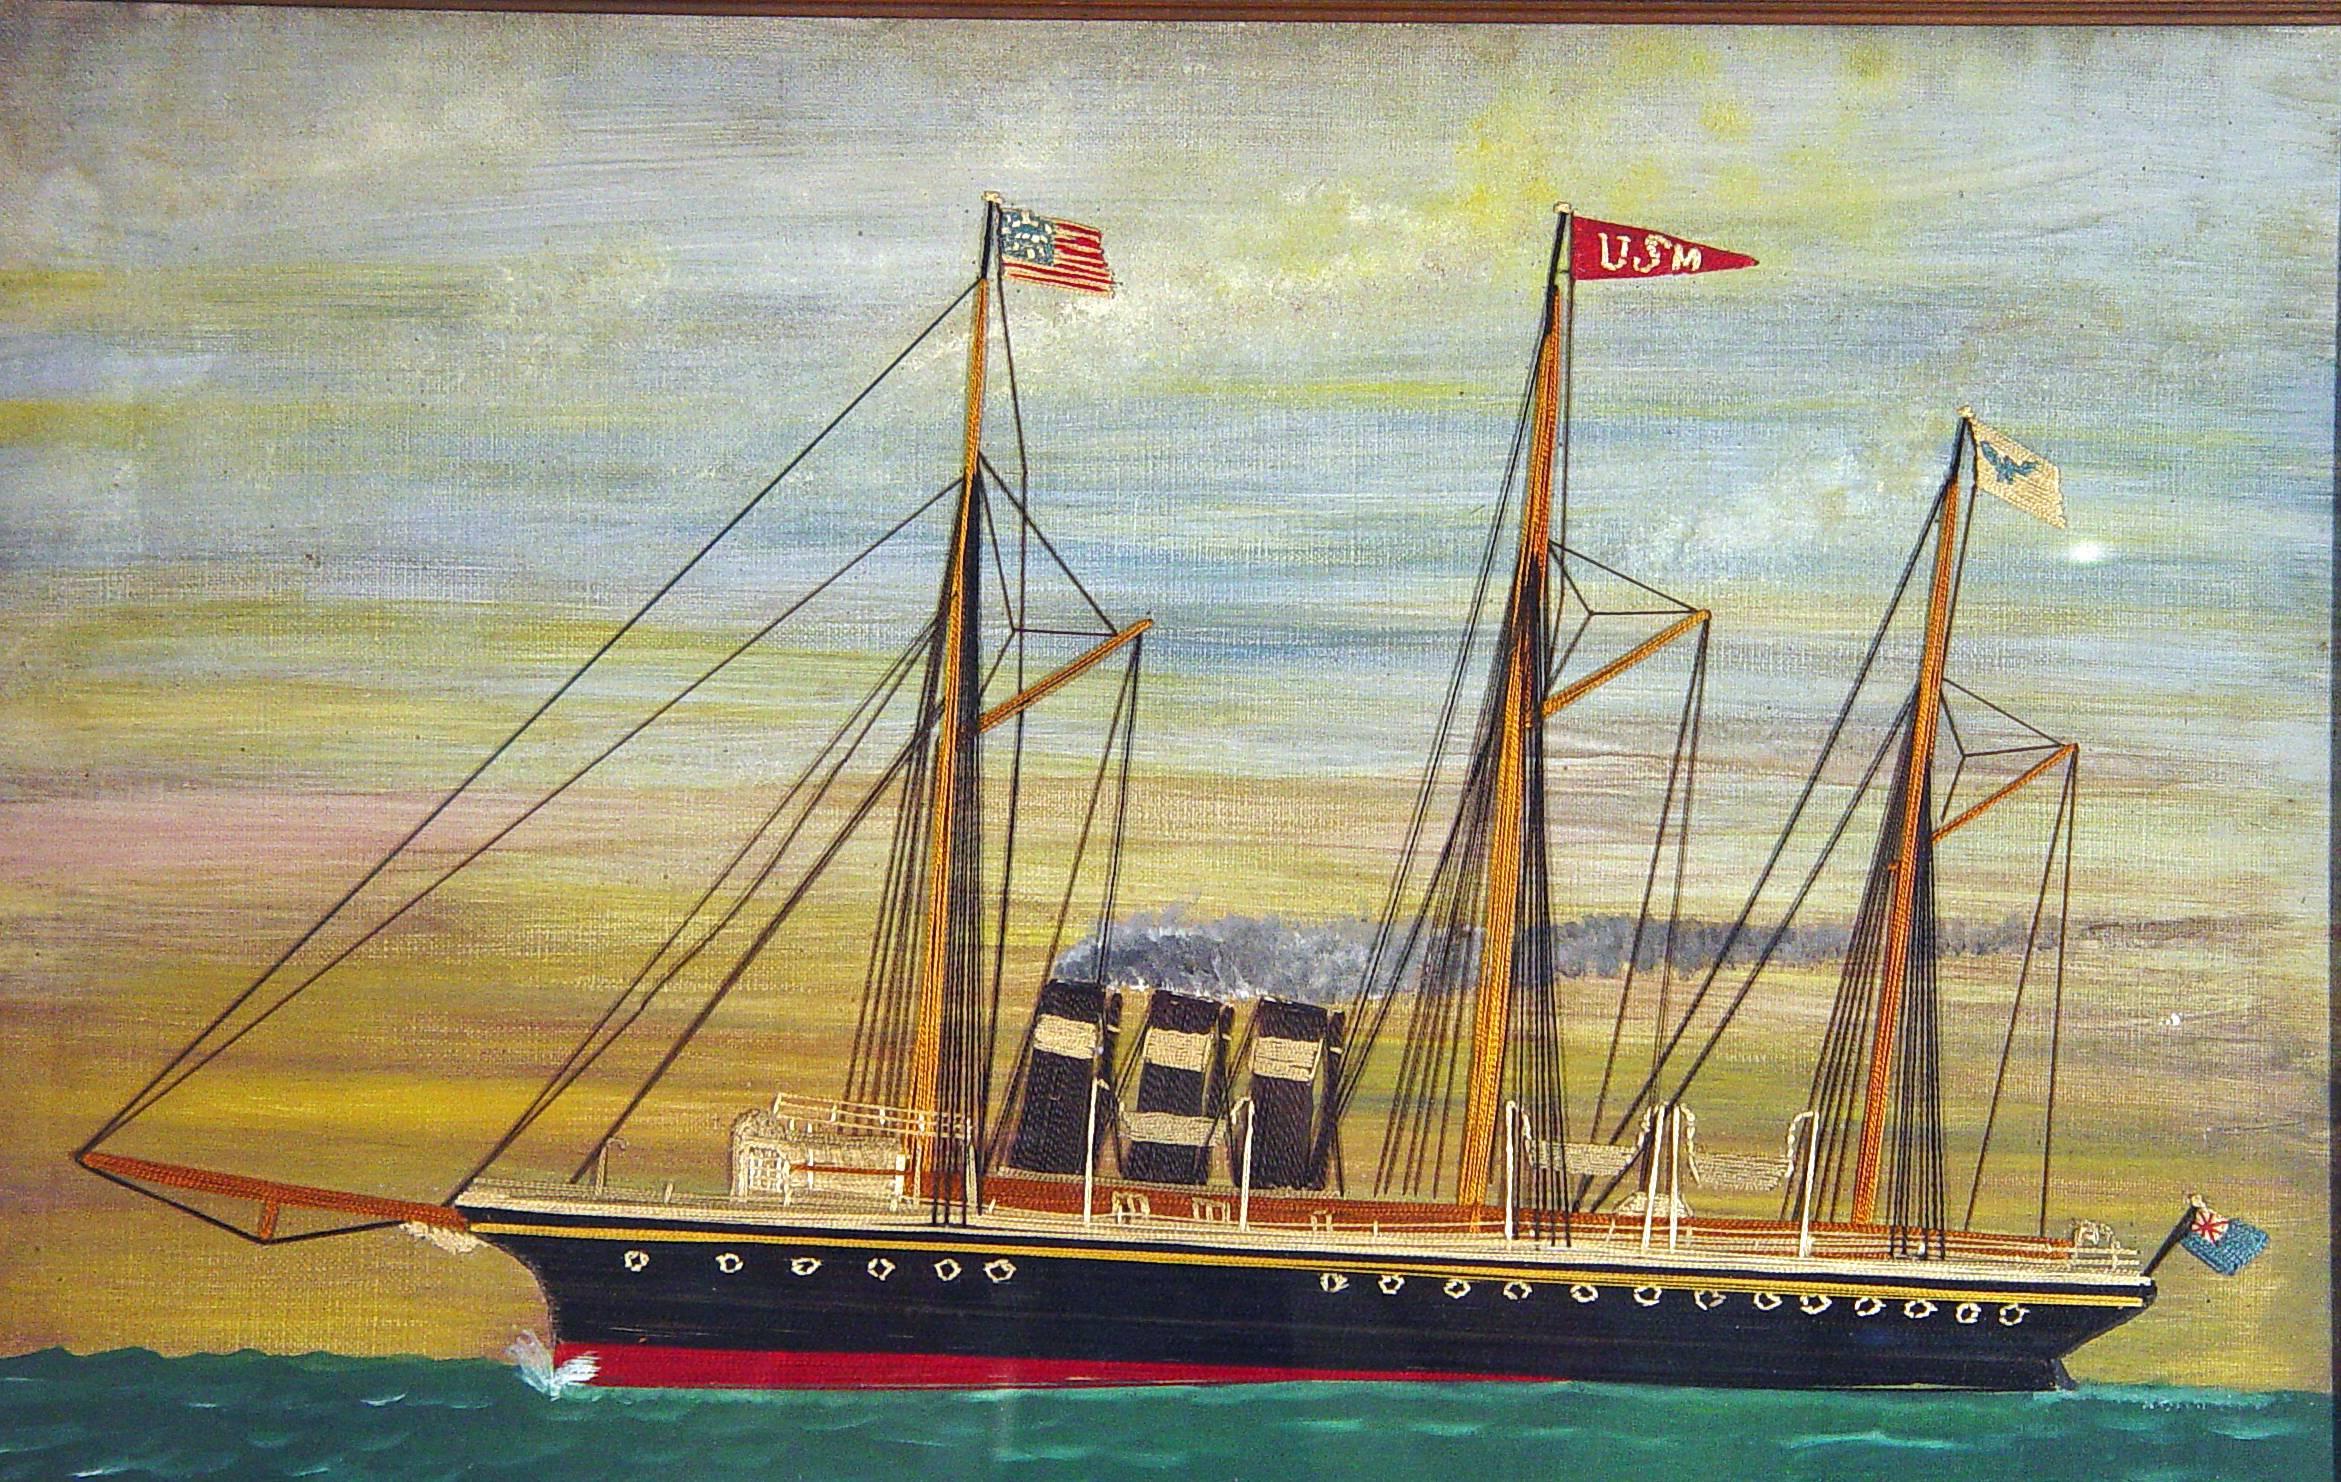 Silk and canvas picture of a British Ship in American Waters,
Initialled M.C. and dated January 1901.

The silk and canvas picture depicts a portside view of a steamship with three masts created in silk on a painted canvas background. The ship is